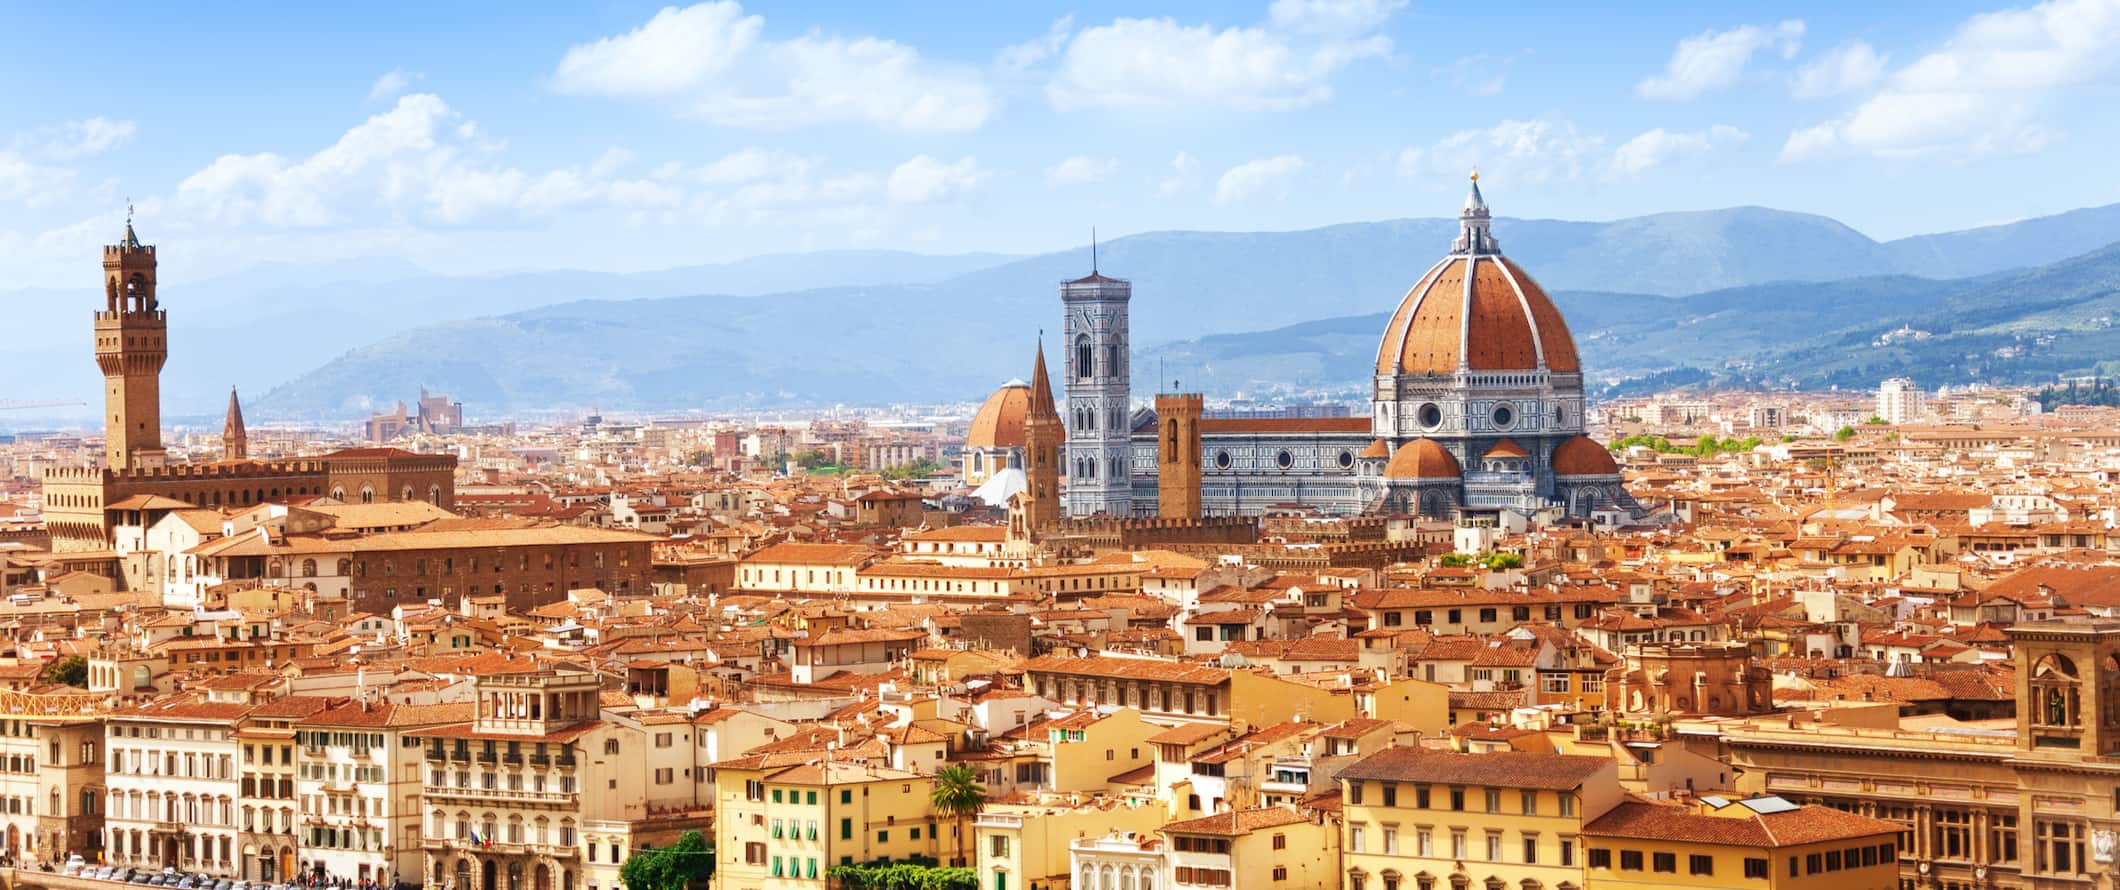 City skyline with red rooftops and the Duomo in Florence, Italy